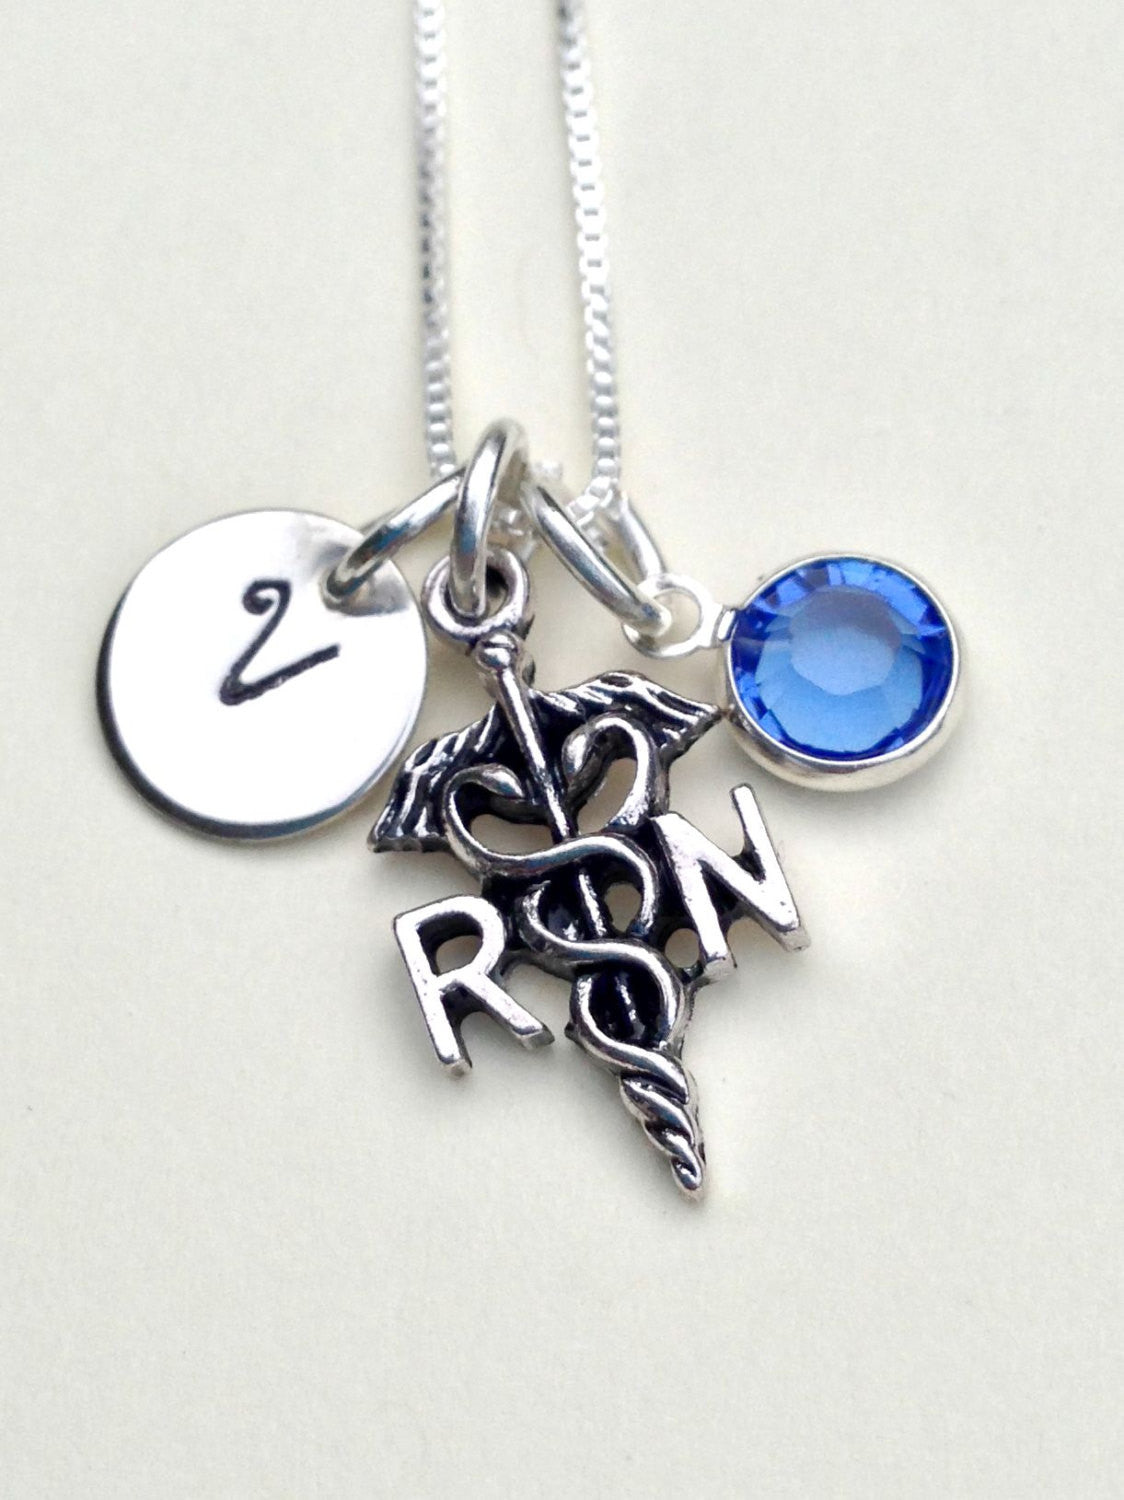 nurse necklace, gifts for nurses, nurse gift, RN necklace, initial necklace, personalized neckalce, gifts for her, mothers day, necklace - Natashaaloha, jewelry, bracelets, necklace, keychains, fishing lures, gifts for men, charms, personalized, 